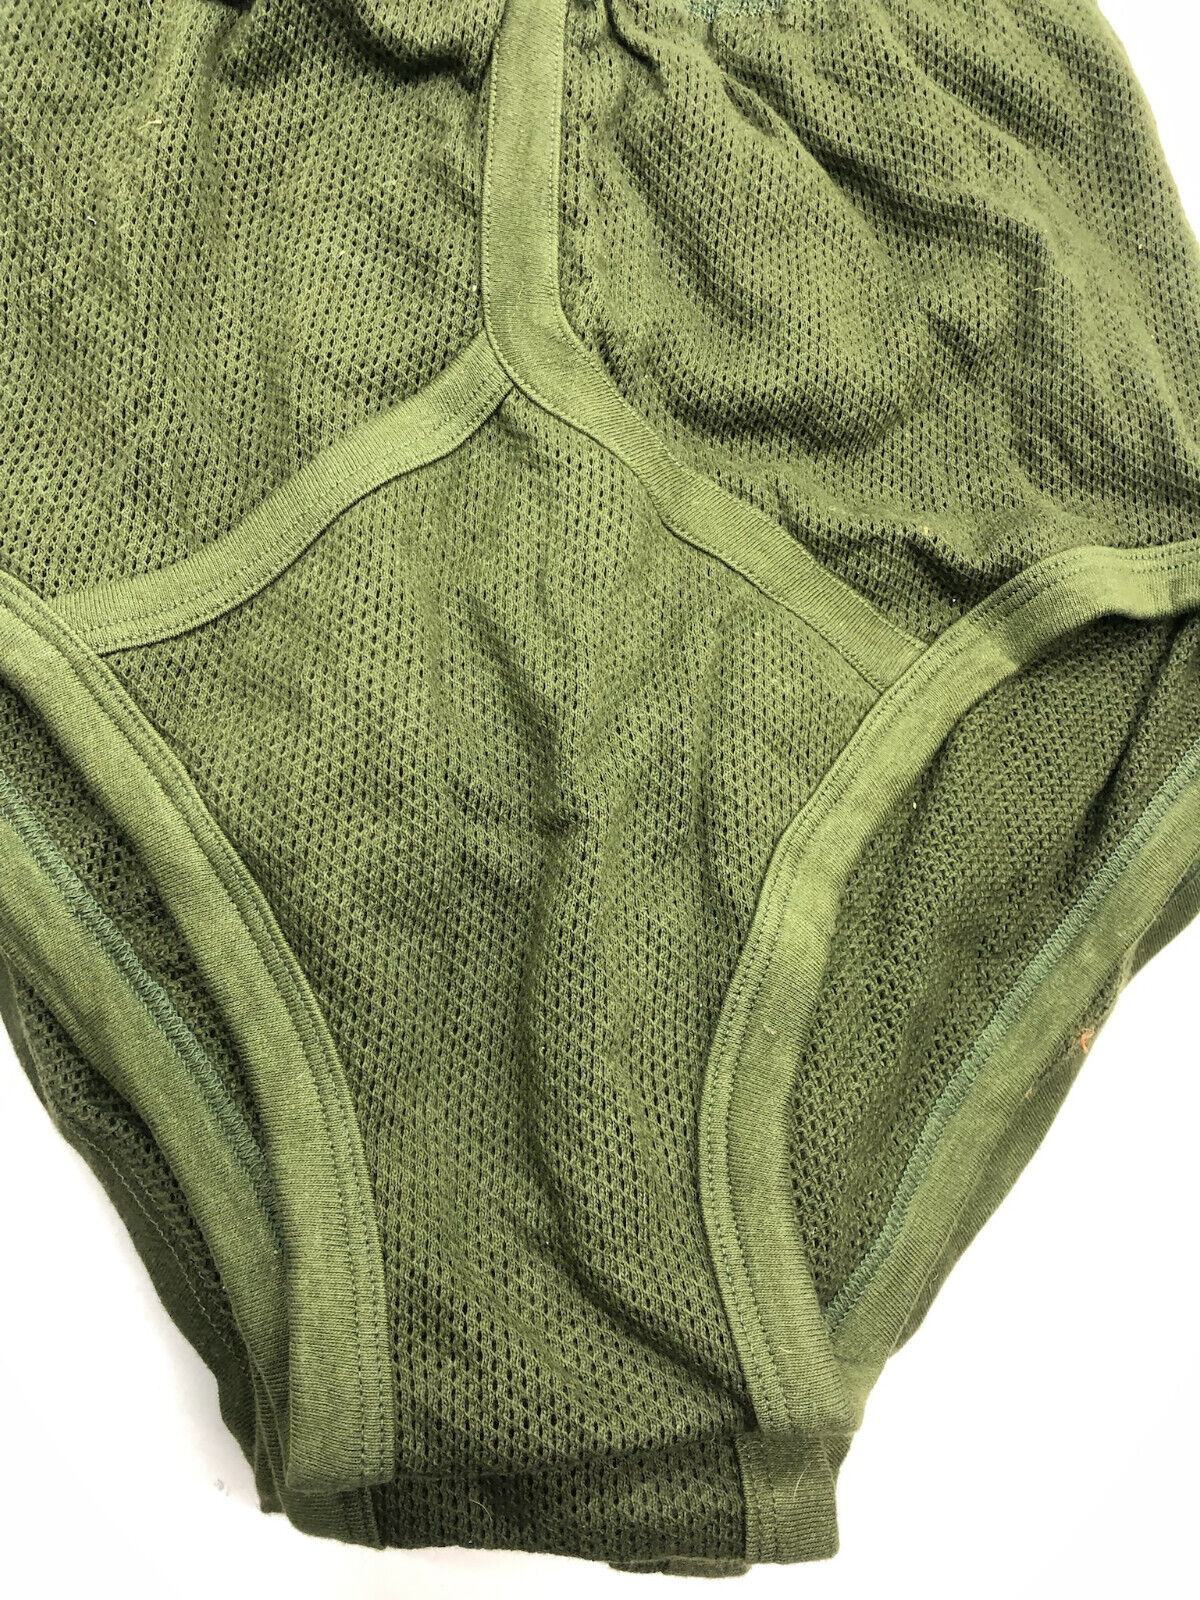 The New Underwear Of The British Army That Makes Them Among The